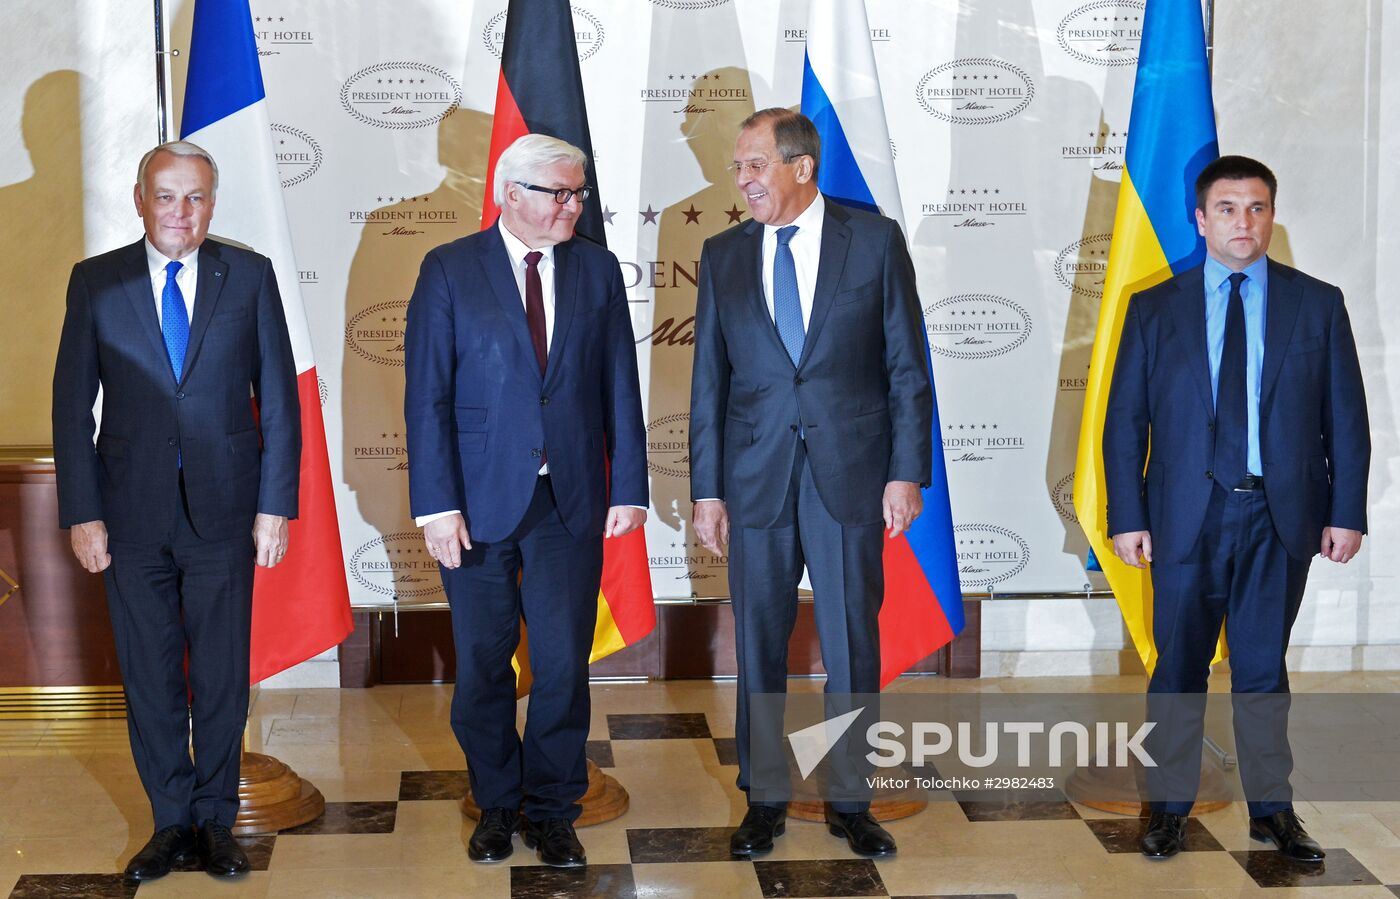 Normandy Four foreign ministers meet in Minsk